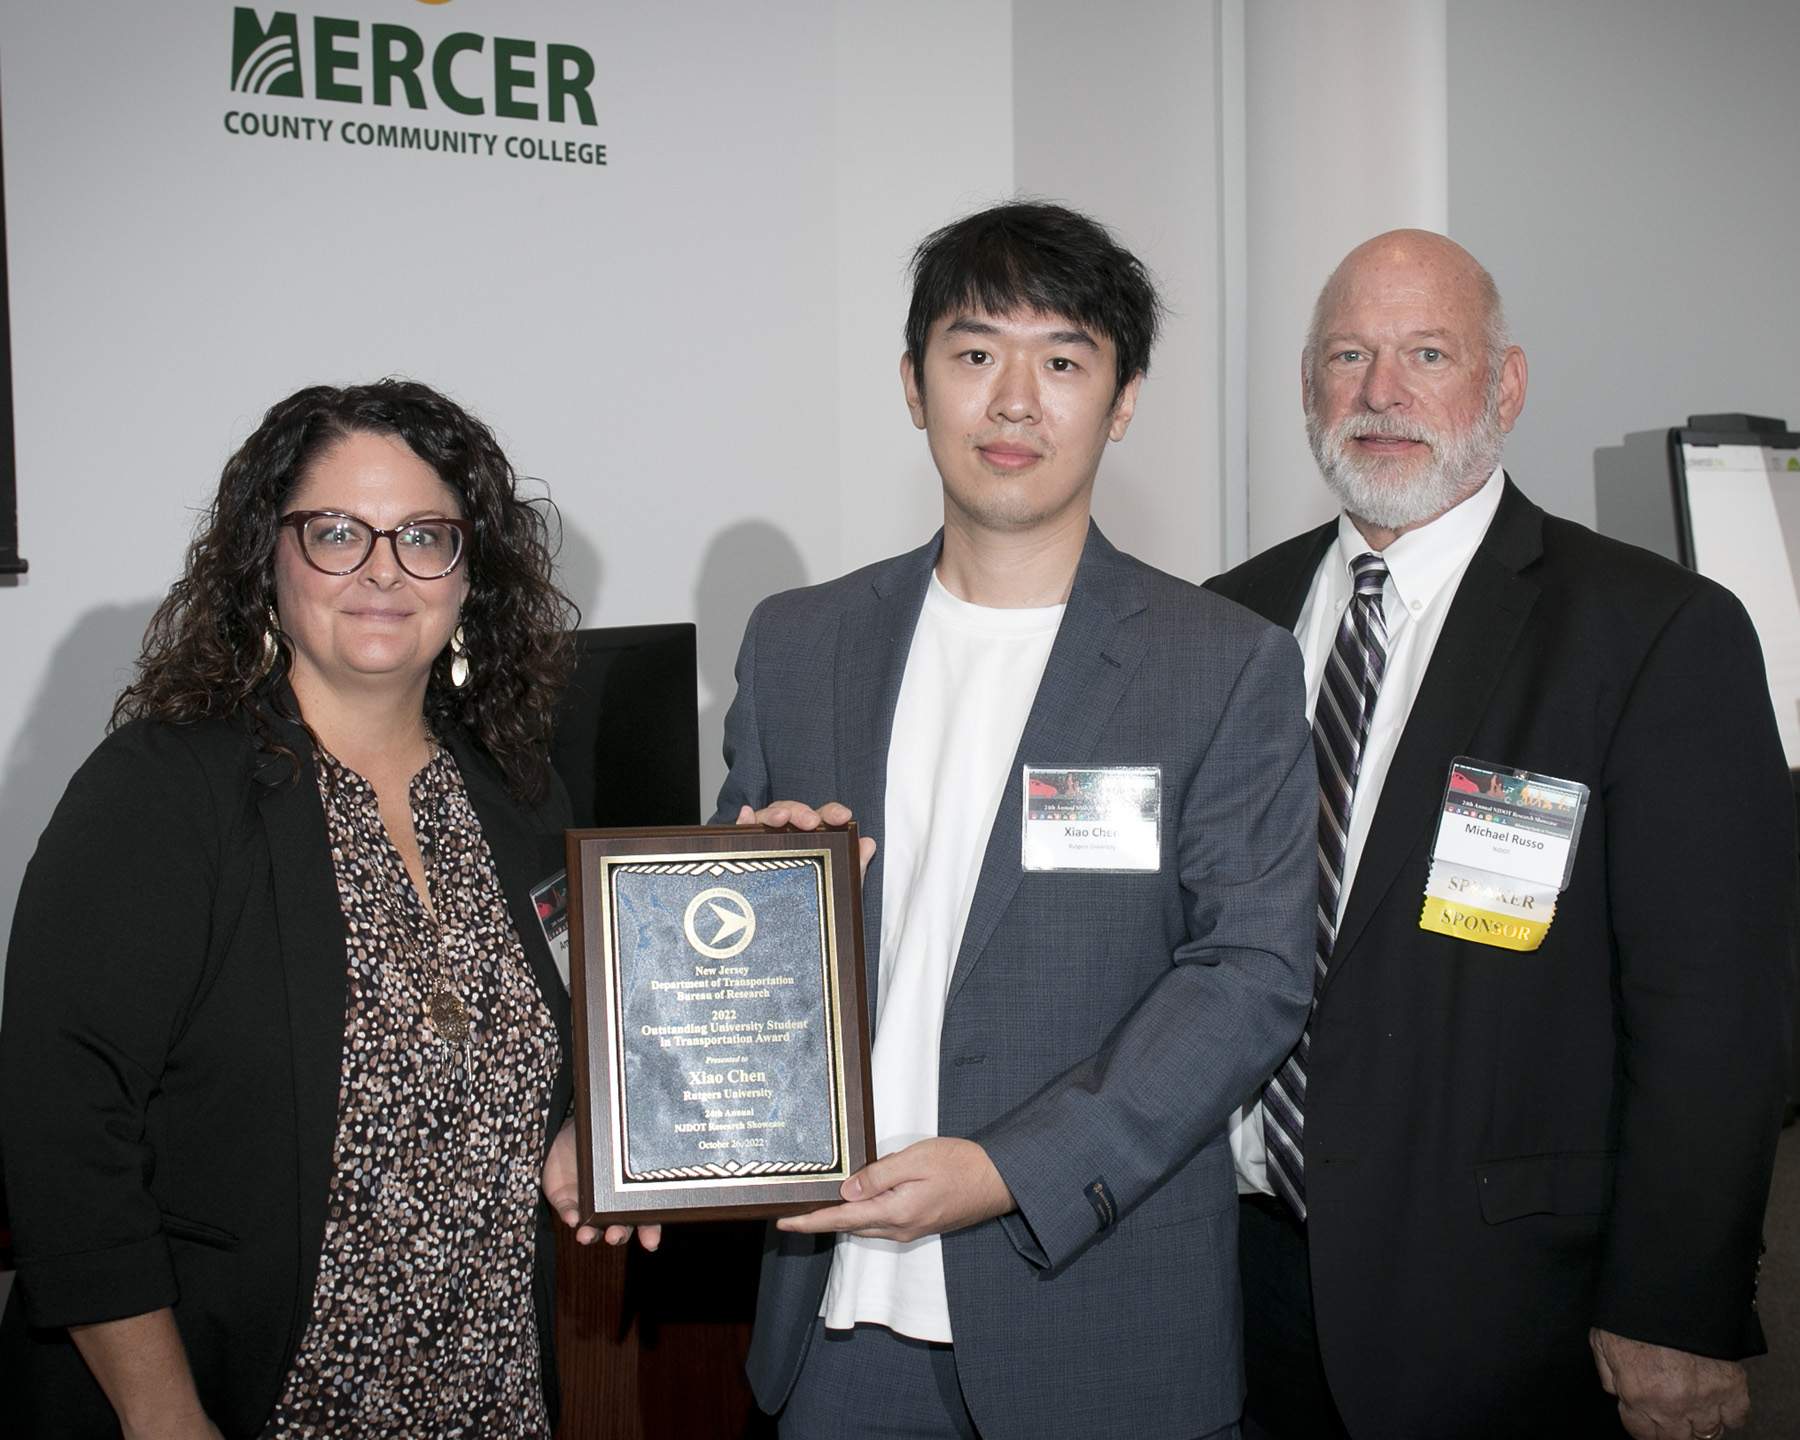 2022 Outstanding University Student in Transportation Research Award, Xiao Chen, Rutgers University, Innovative Pothole Repair Materials and Techniques. Photo by Steve Goodman.